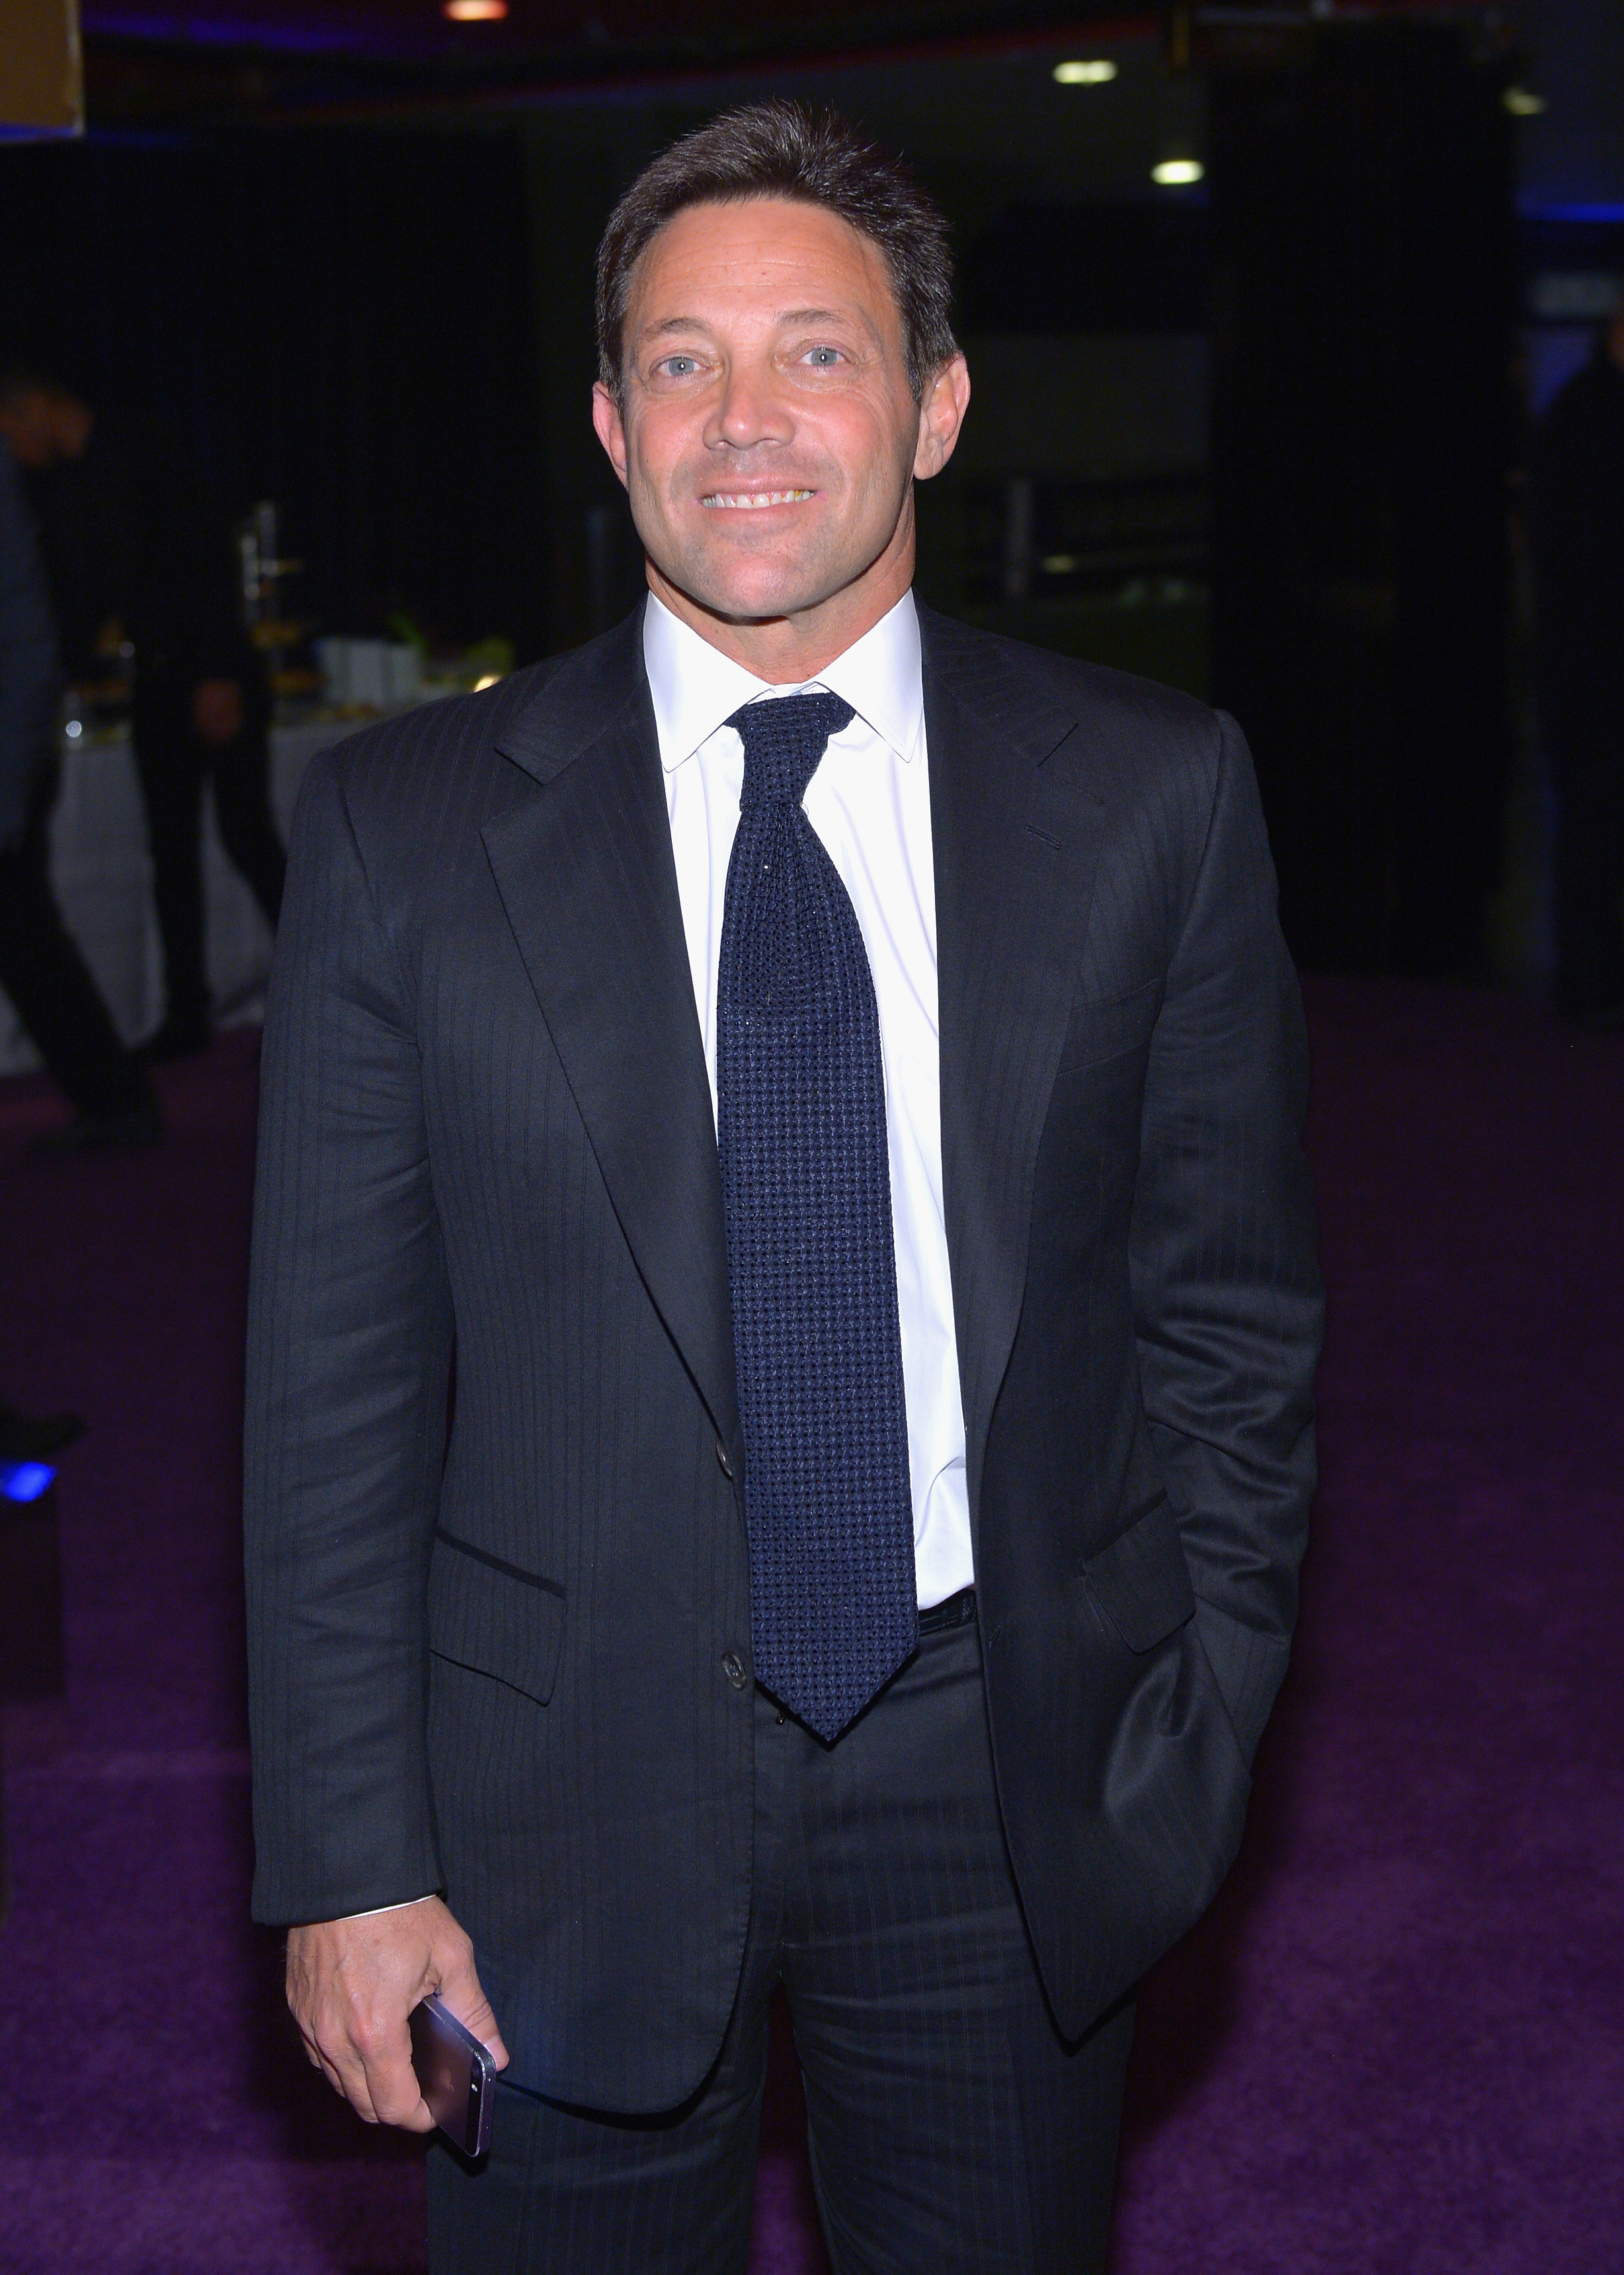 Jordan Belfort at the  premiere after party for "The Wolf of Wall Street" on December 17, 2013, in New York City. | Source: Getty Images